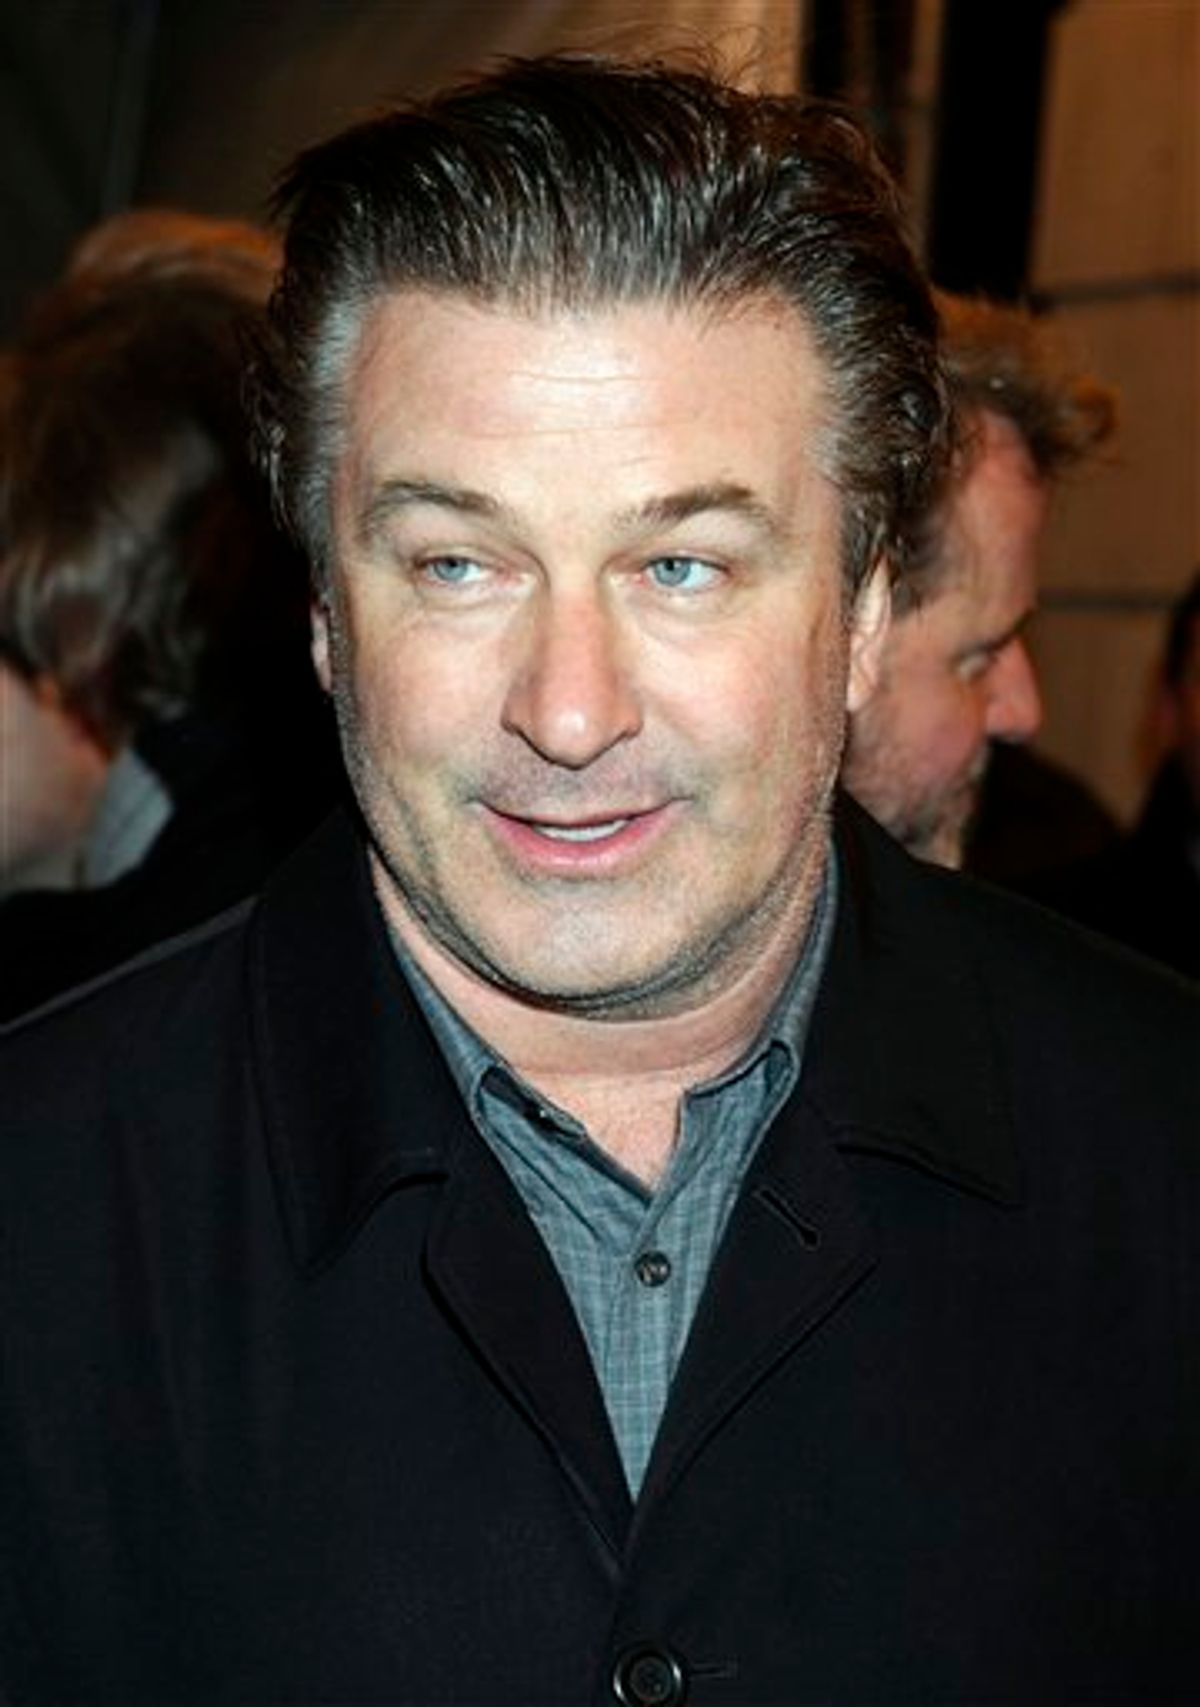 Actor Alec Baldwin arrives for the first-ever concert by Paul McCartney at Harlem's Apollo Theater, Monday, Dec. 13, 2010 in New York. (AP Photo/Henny Ray Abrams) (AP)